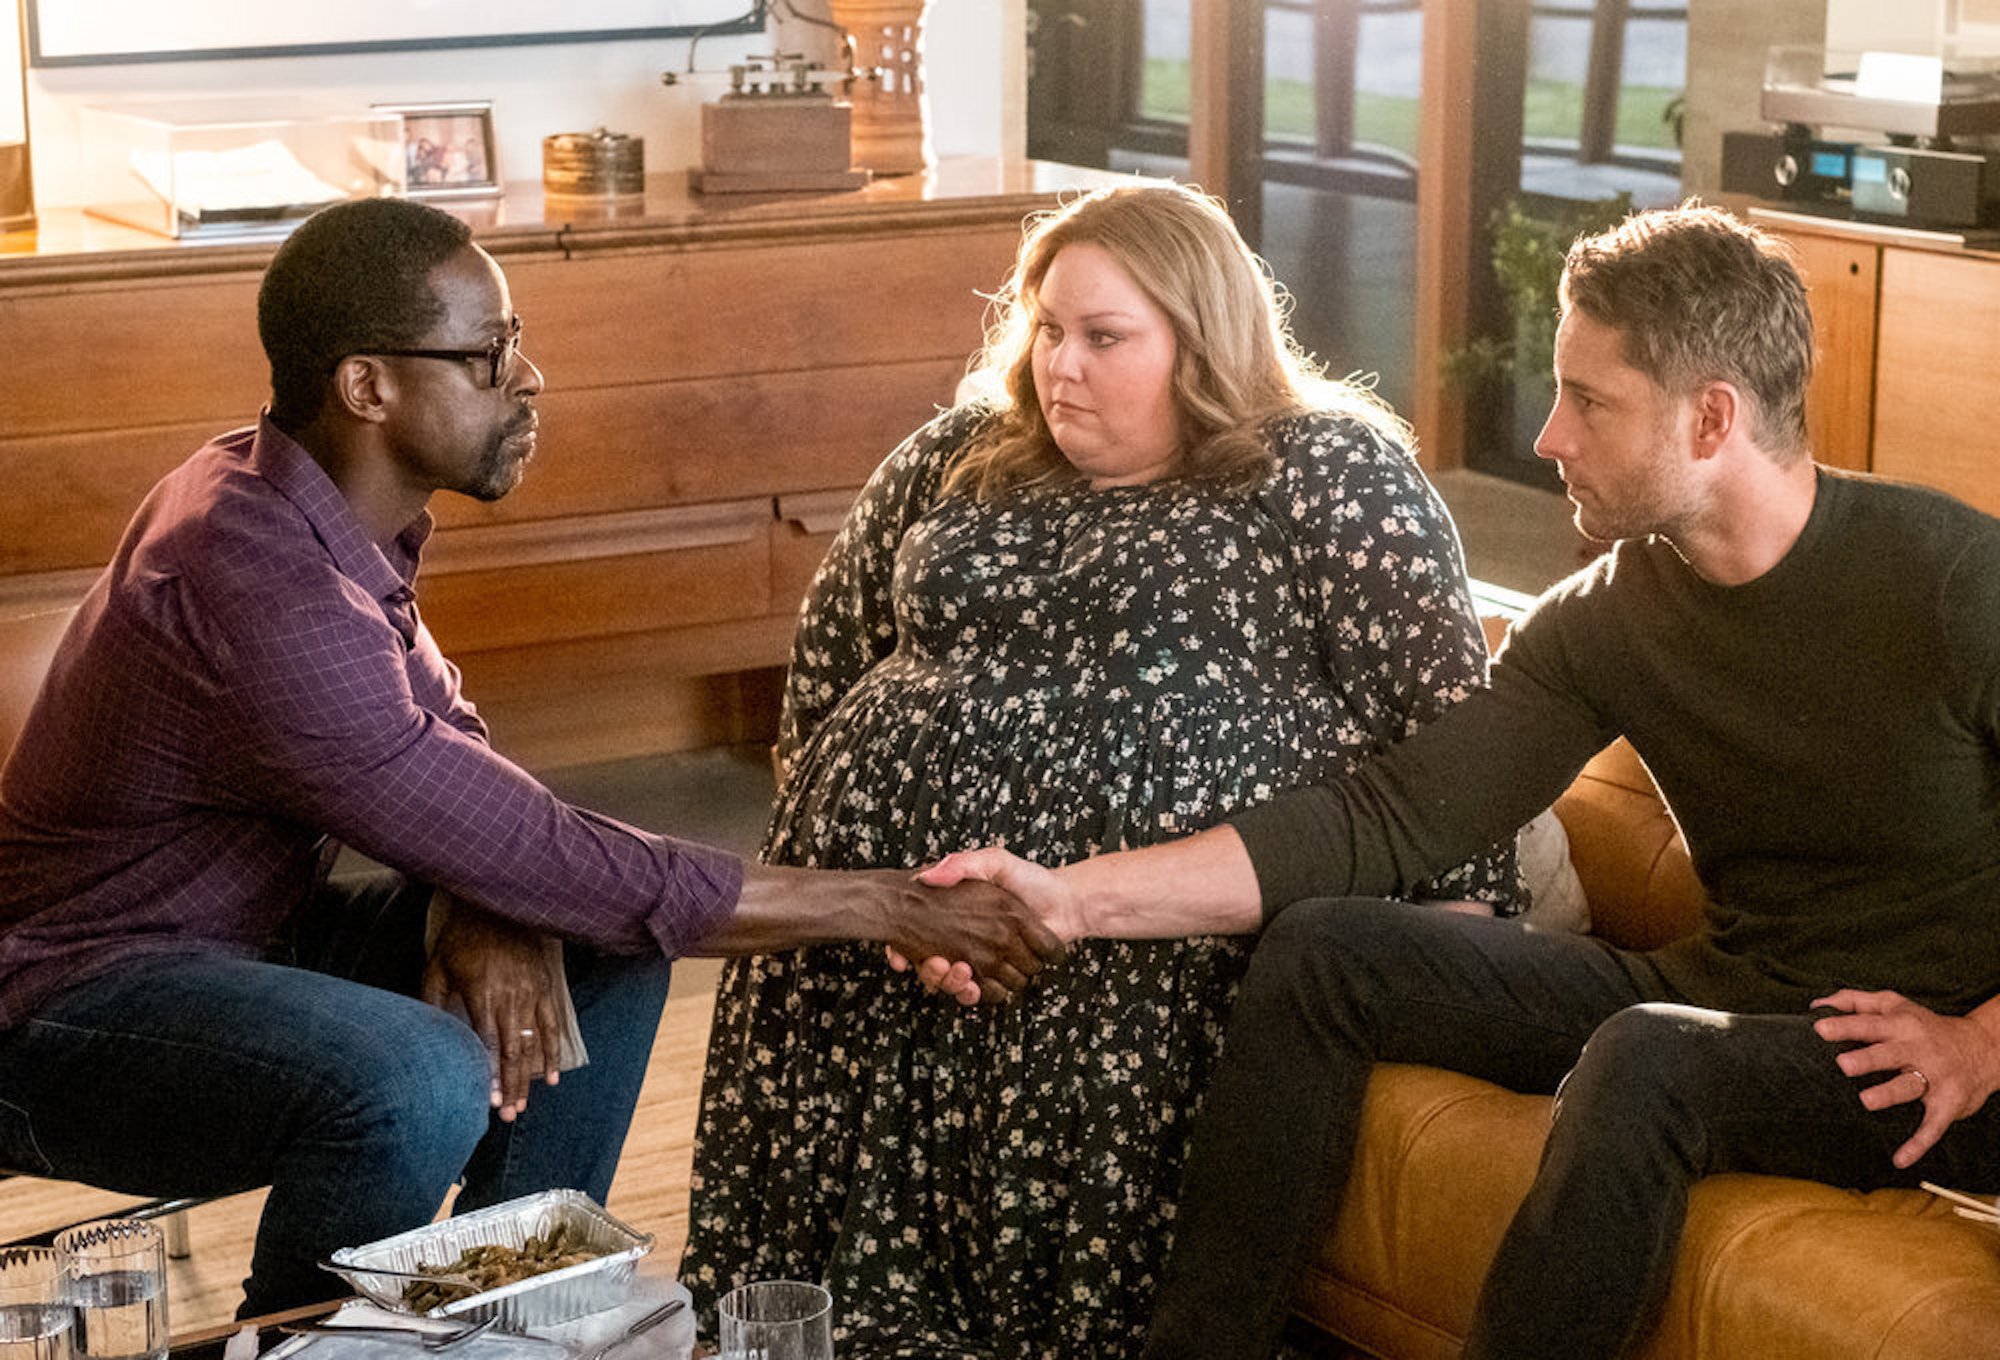 Sterling K. Brown as Randall, Chrissy Metz as Kate, and Justin Hartley as Kevin sitting together in 'This Is Us' Season 6 Episode 16